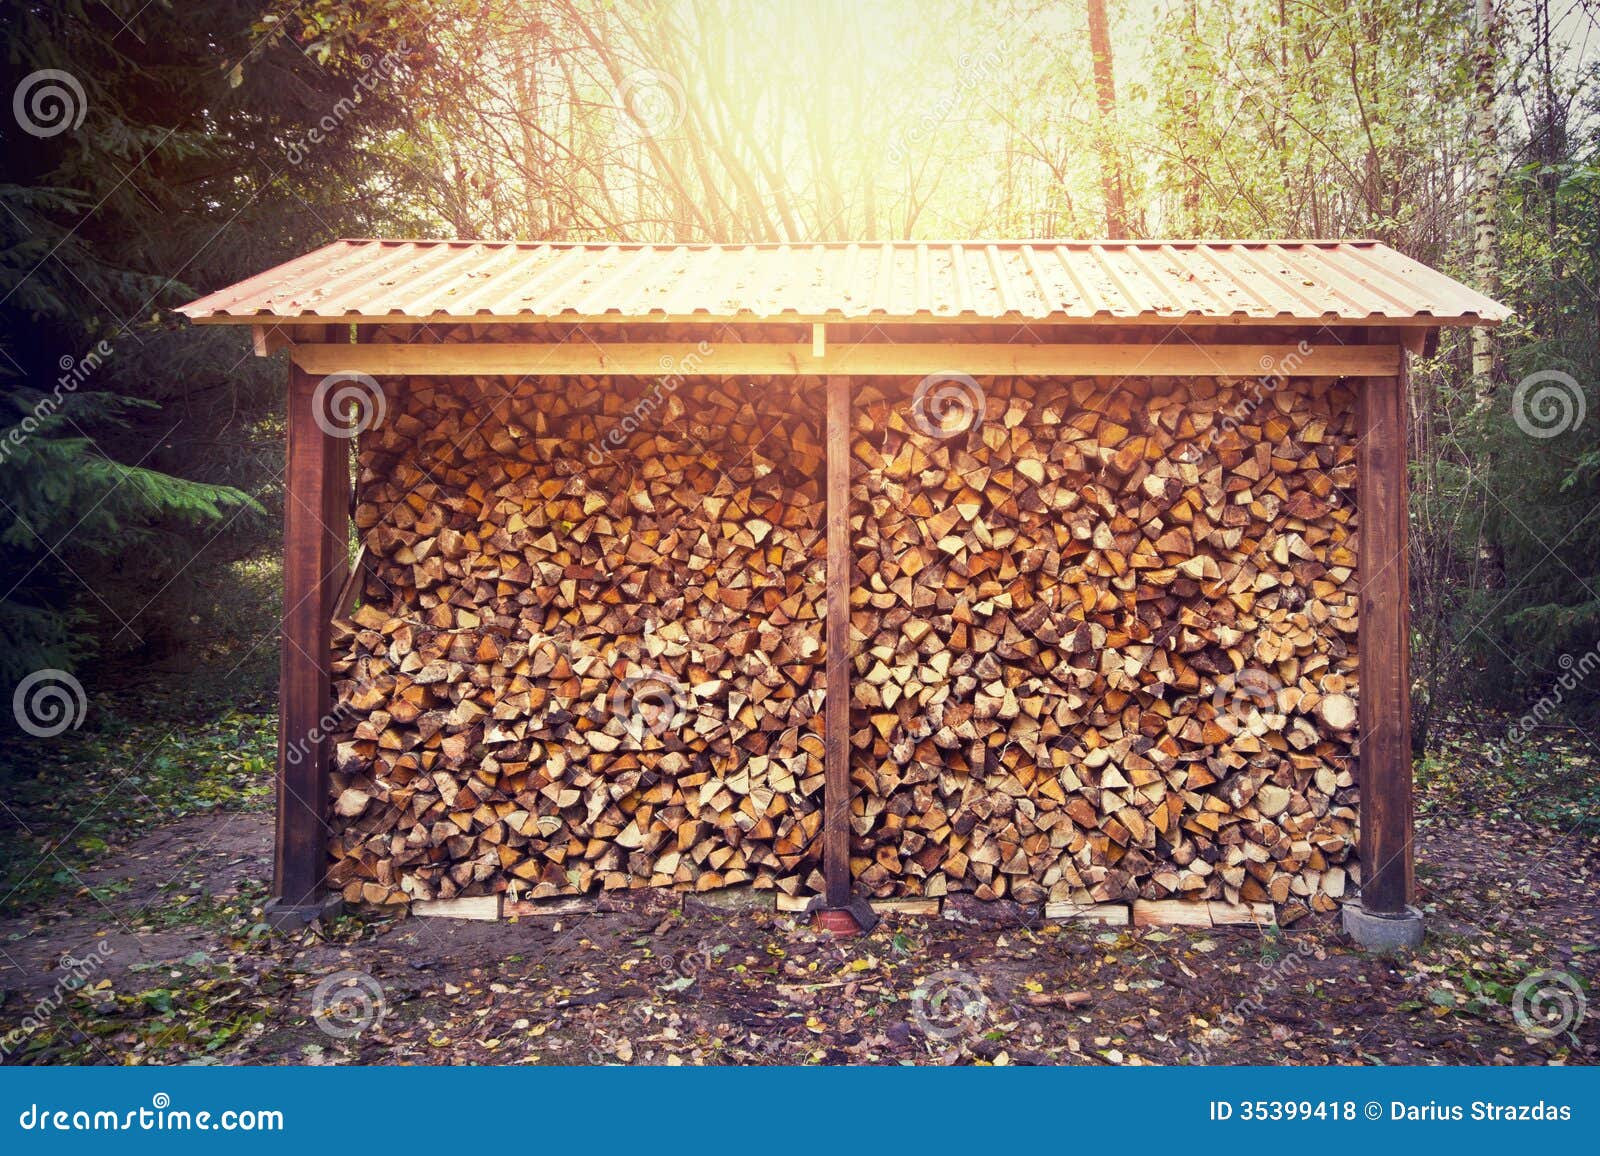 Firewood Stacked In Shed Royalty Free Stock Photos - Image 